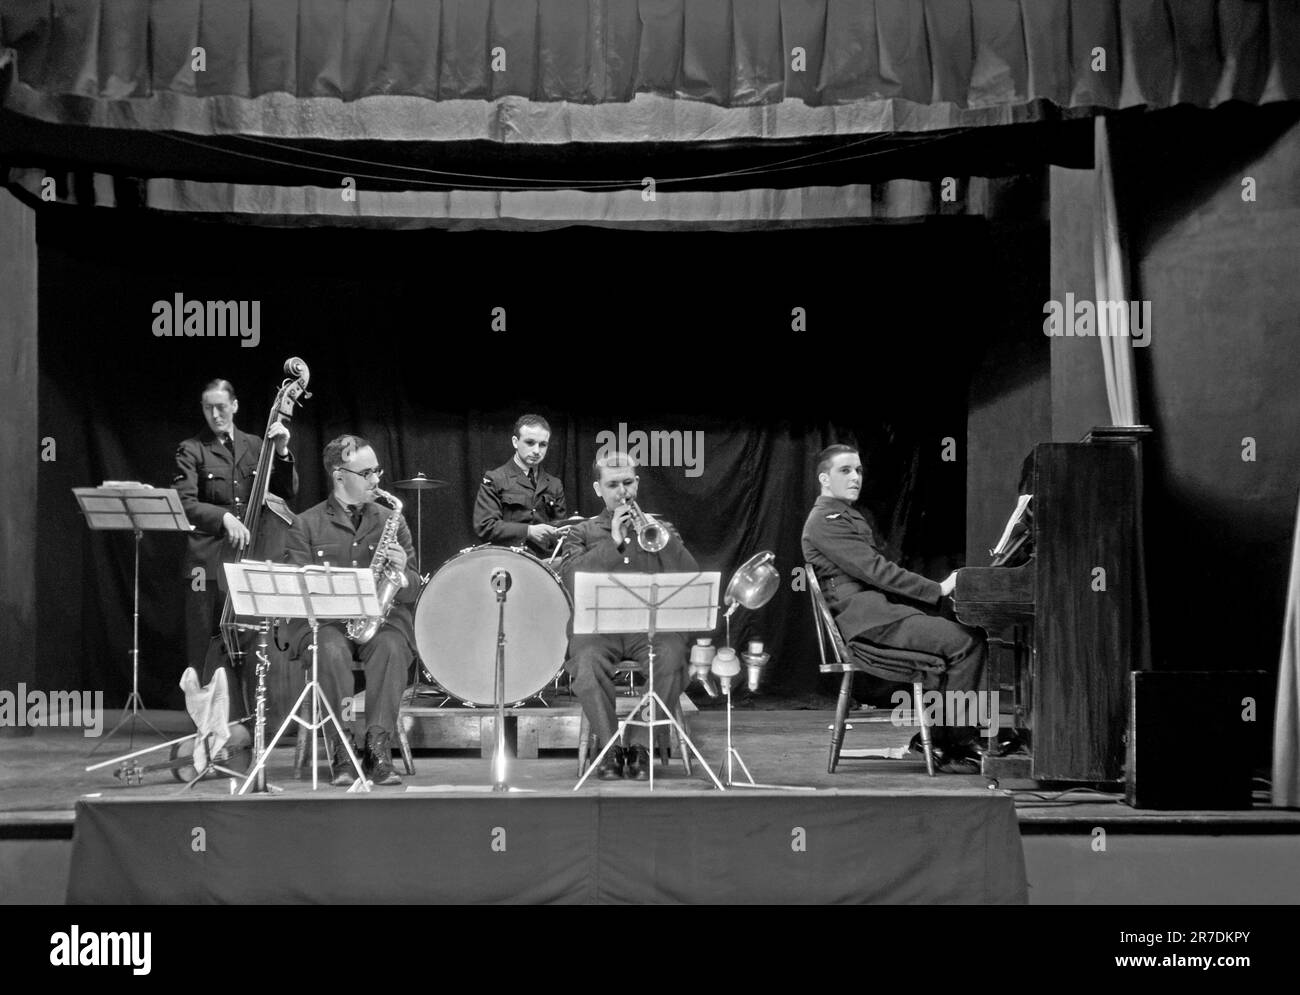 A British five-piece military dance band, the Number 2 Station Band, Farnborough onstage 5 December 1940. Farnborough, Hampshire, England, UK was home to the Royal Aircraft Establishment (RAE) and the players are wearing their RAF uniforms. Early dance and swing bands had their heyday in the UK during the 1920s–30s. Bands played in dance halls and hotel ballrooms. They played melodic, good-time music and individual players would play in several bands. This image is from an old glass negative – a vintage 1940s photograph. Stock Photo